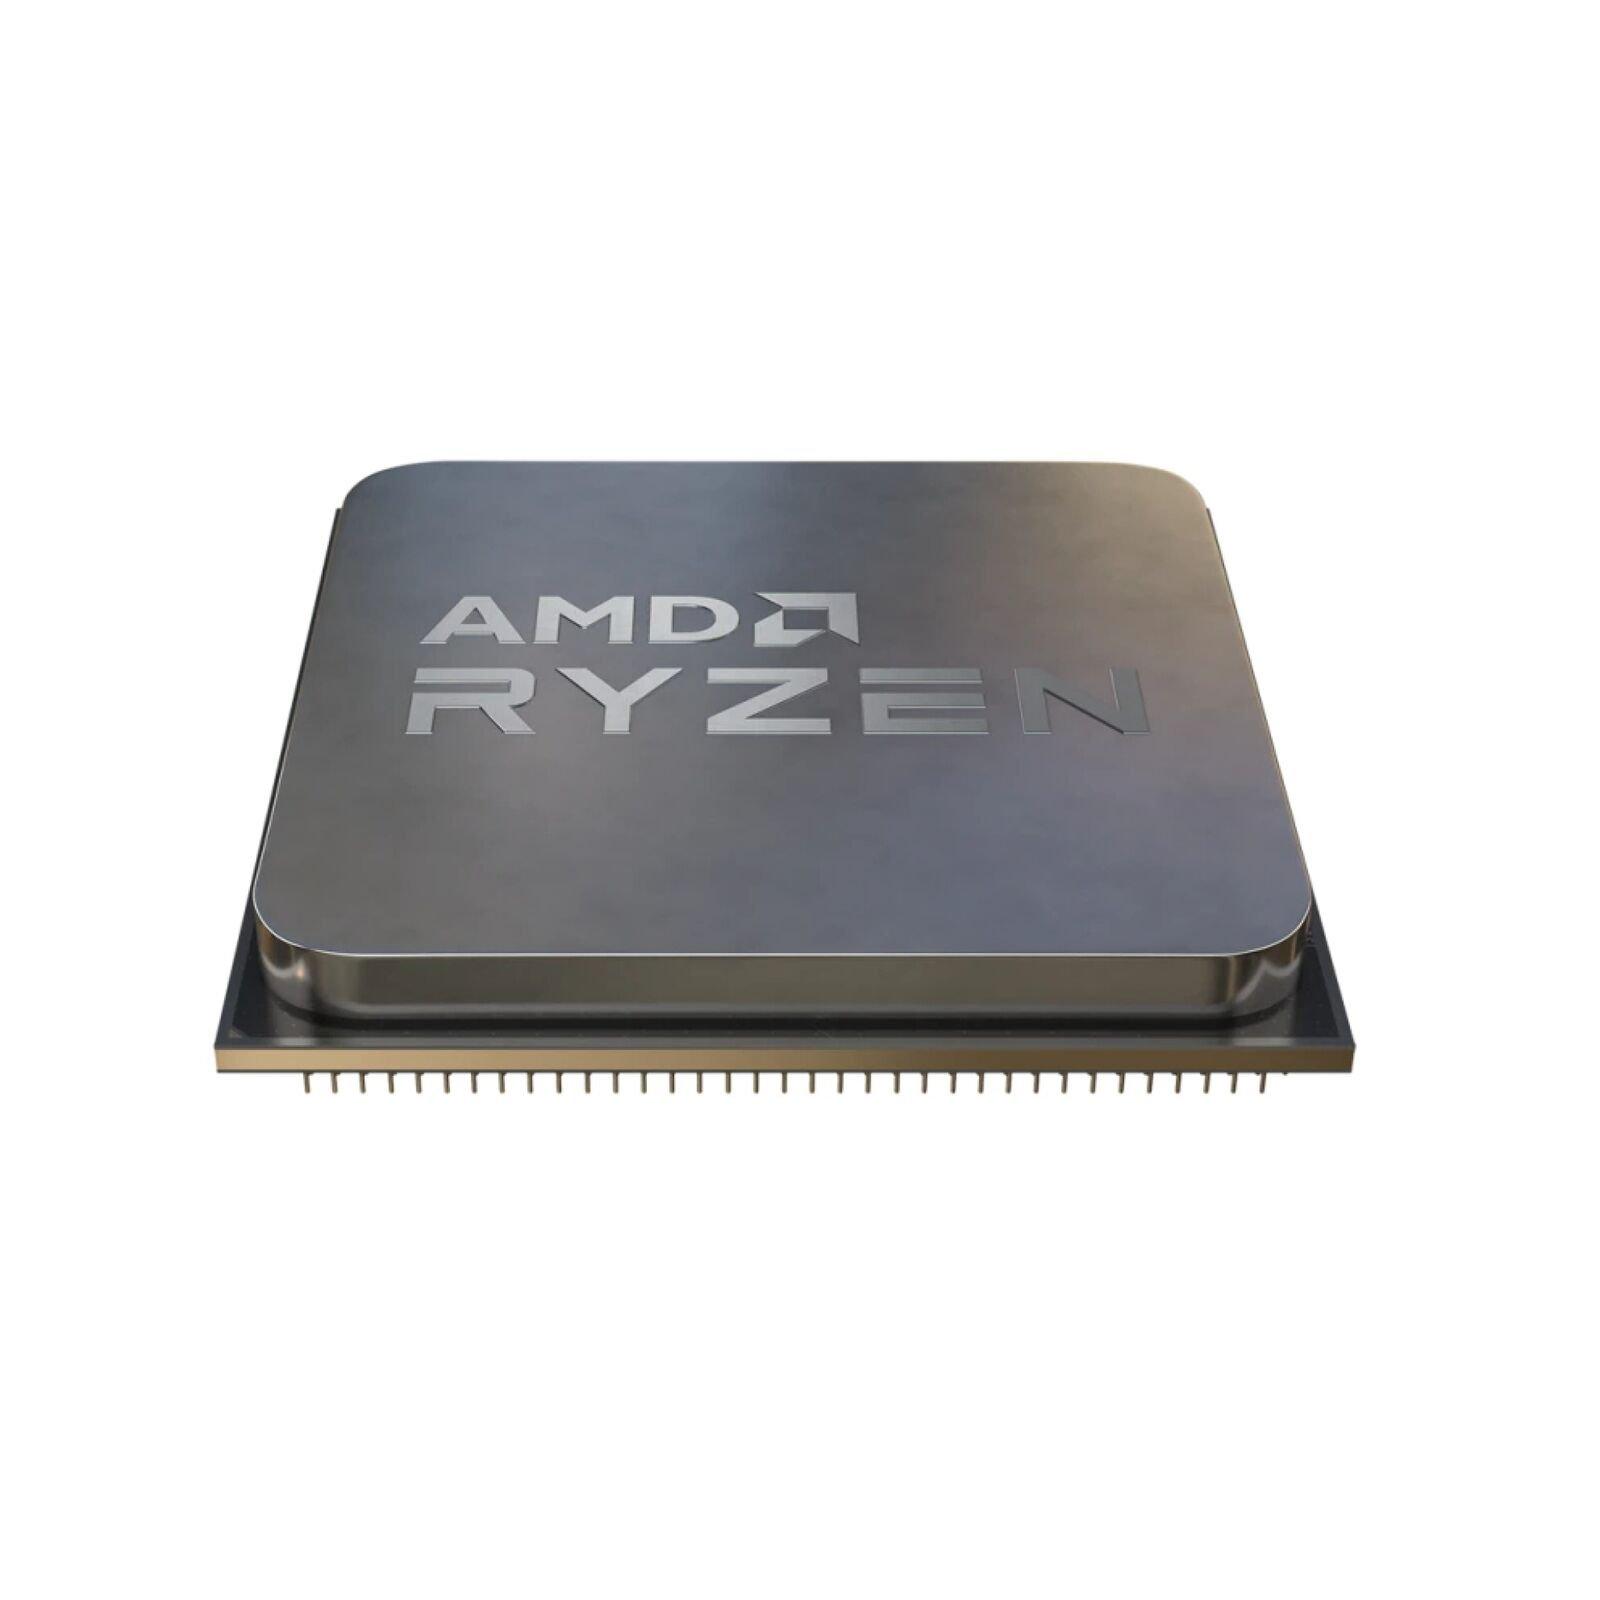 AMD Ryzen 5 5500 Processor 6-core 12 Threads up to 4.2 GHz Wraith Stealth  Cooler AM4